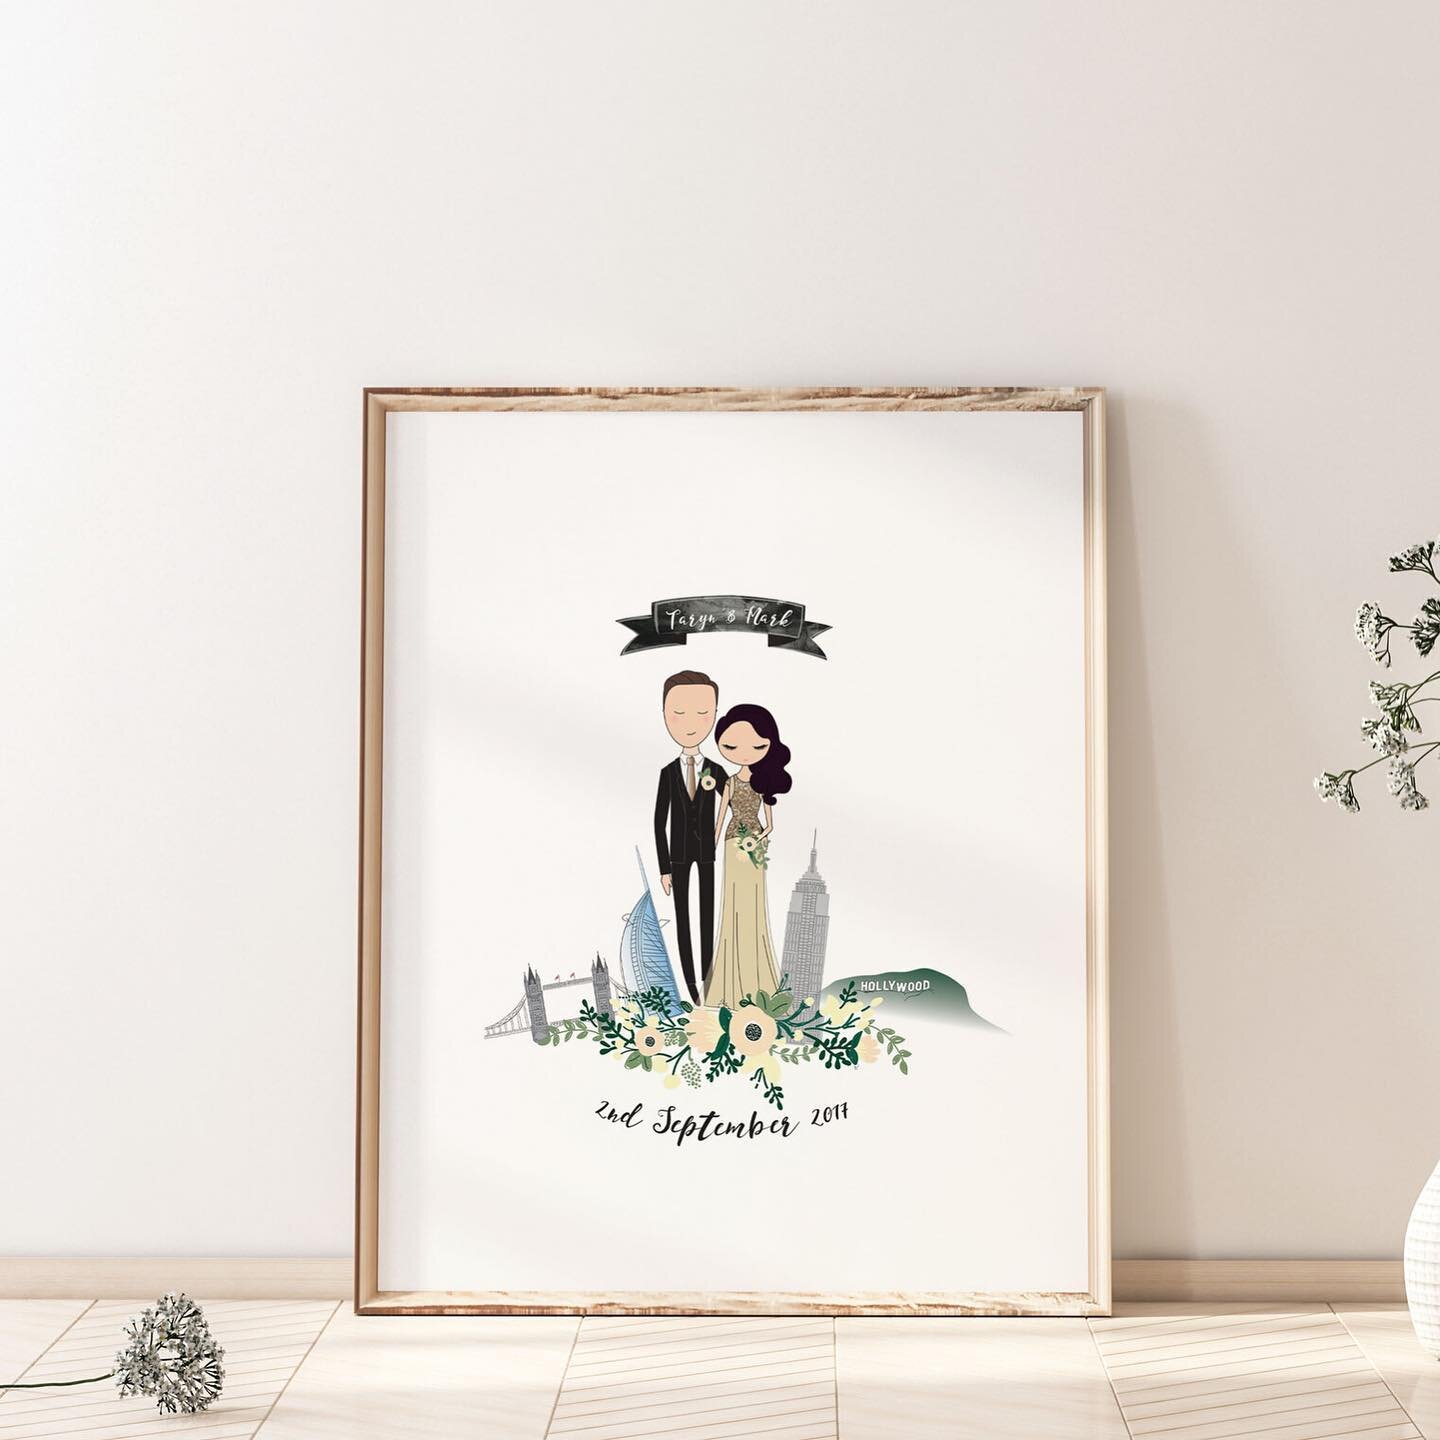 Cuteeeeee keepsake from a special day... a wedding portrait, this particular one features a skyline that tells a love story, places they&rsquo;ve lived, visited, sentimental places. 

#wedding #weddingportrait #weddingstationery #weddinginvite #weddi